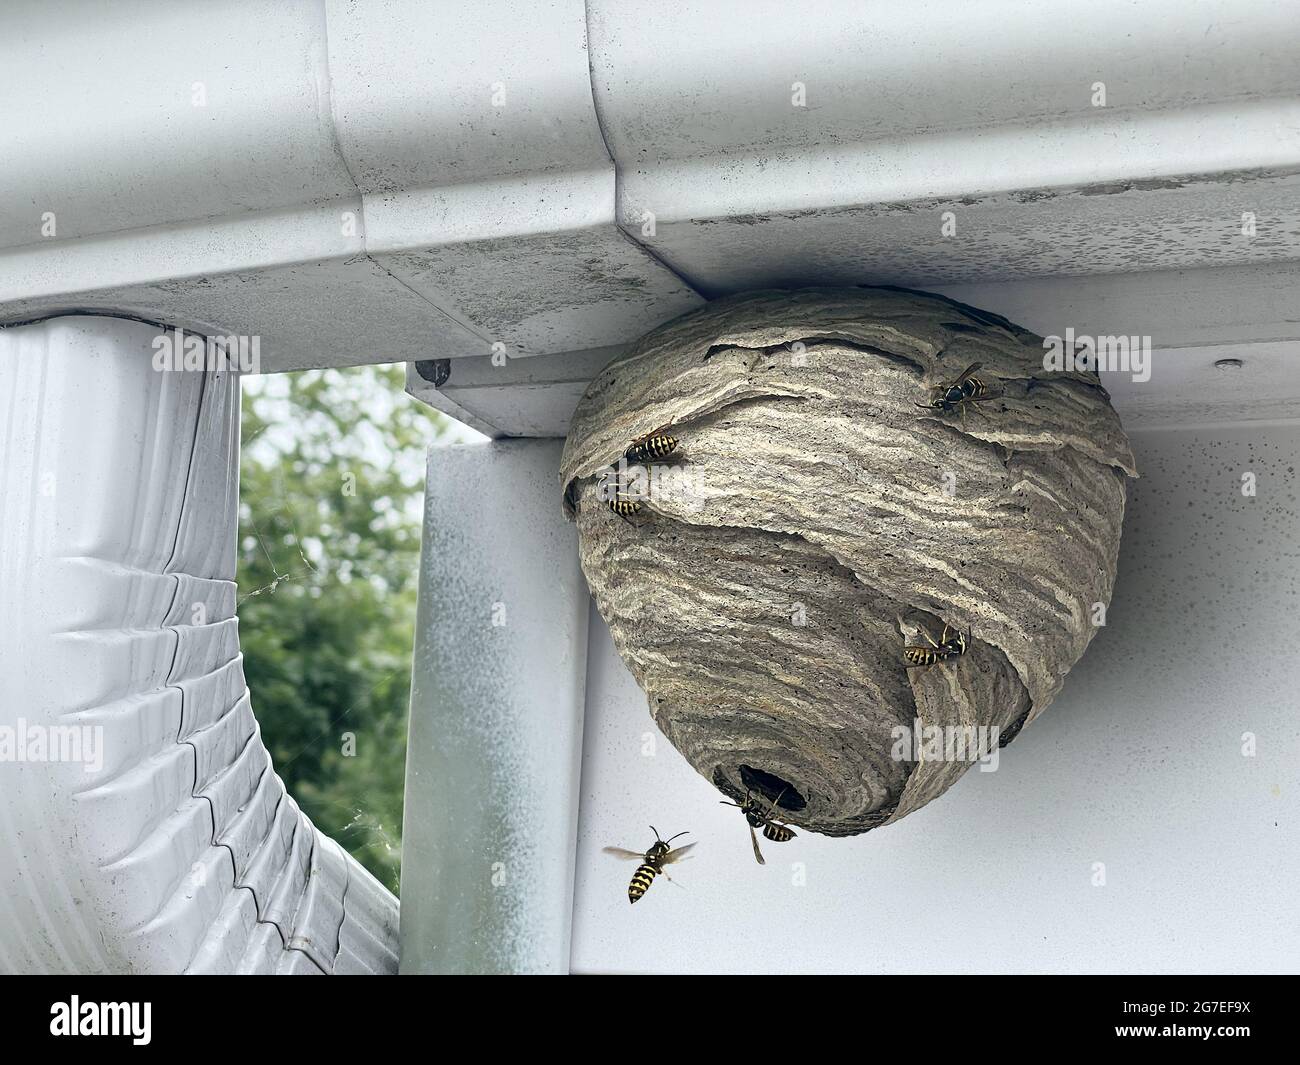 Wasp nest attached to home outdoor wall and roof as a gray paper colony of yellow jacket hornets as insects flying in and out of the natural structure Stock Photo